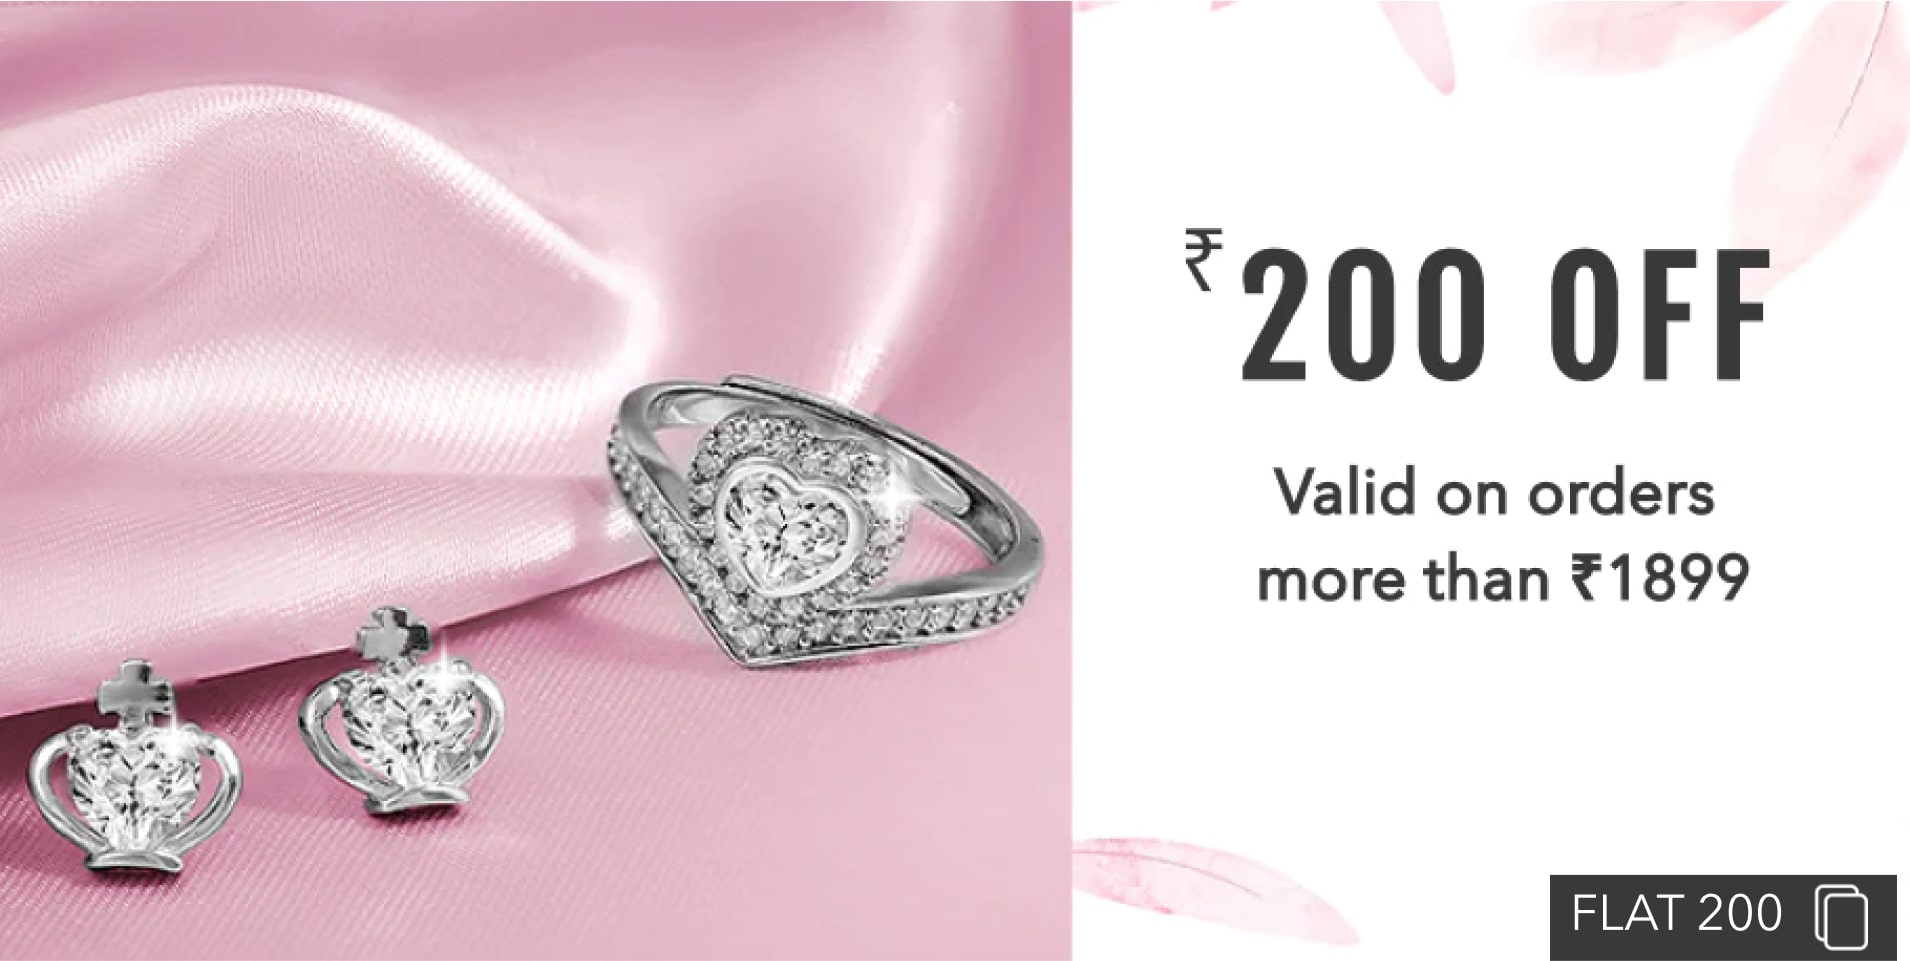 ₹200 OFF Valid on orders more than ₹1899